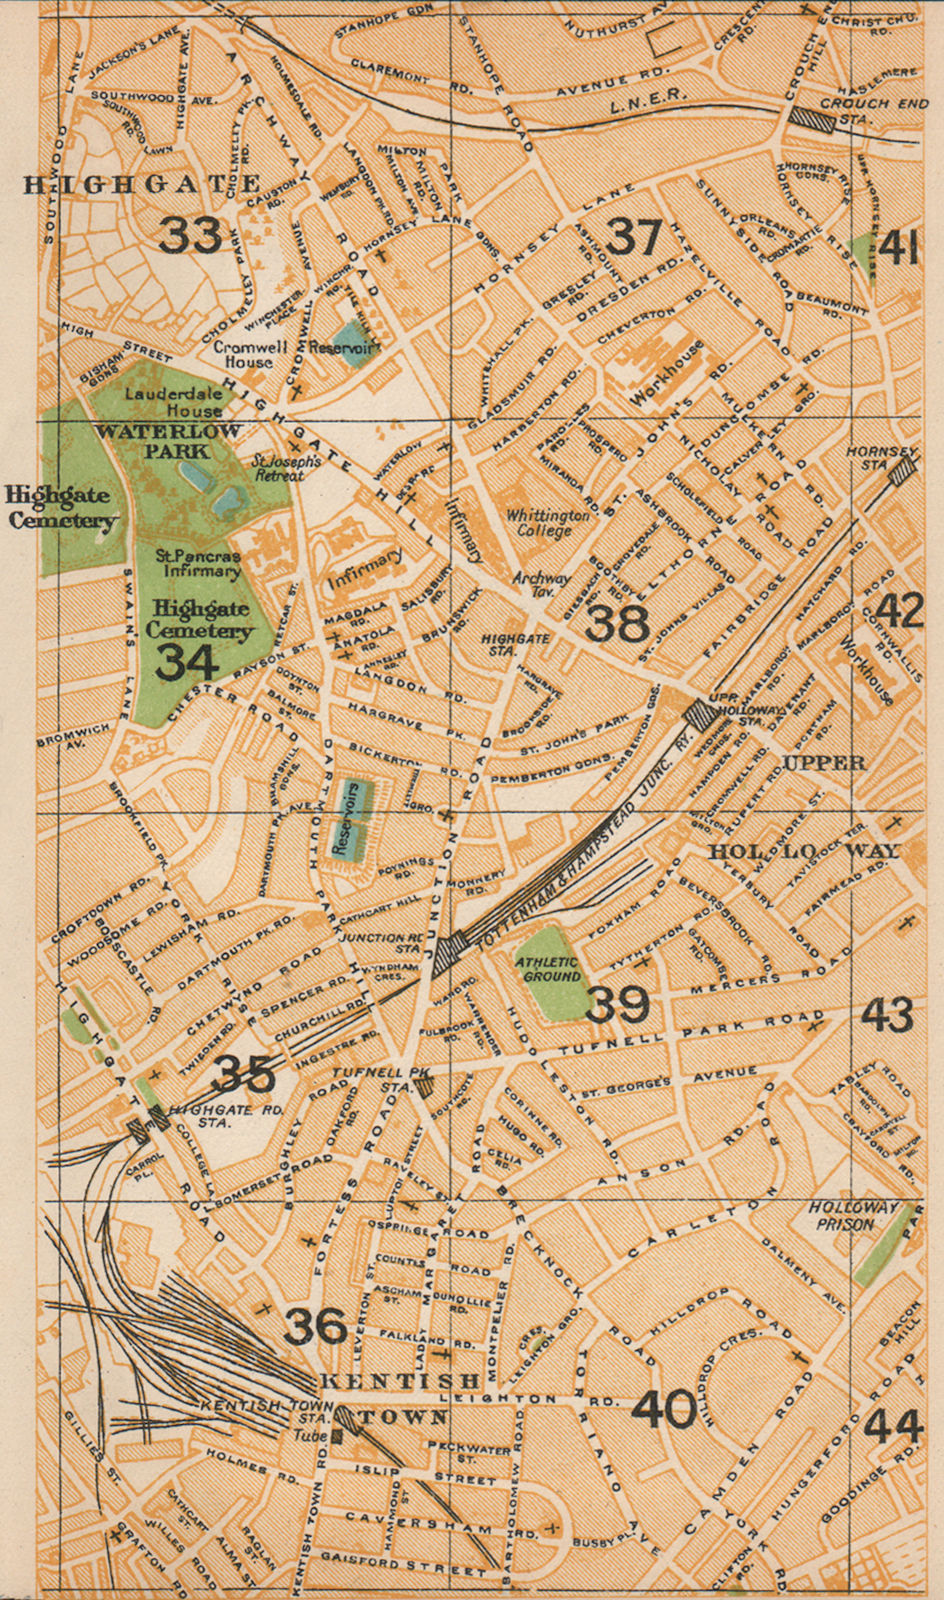 LONDON N. Kentish Town Archway Highgate Cemetery Tufnell Park Holloway 1927 map